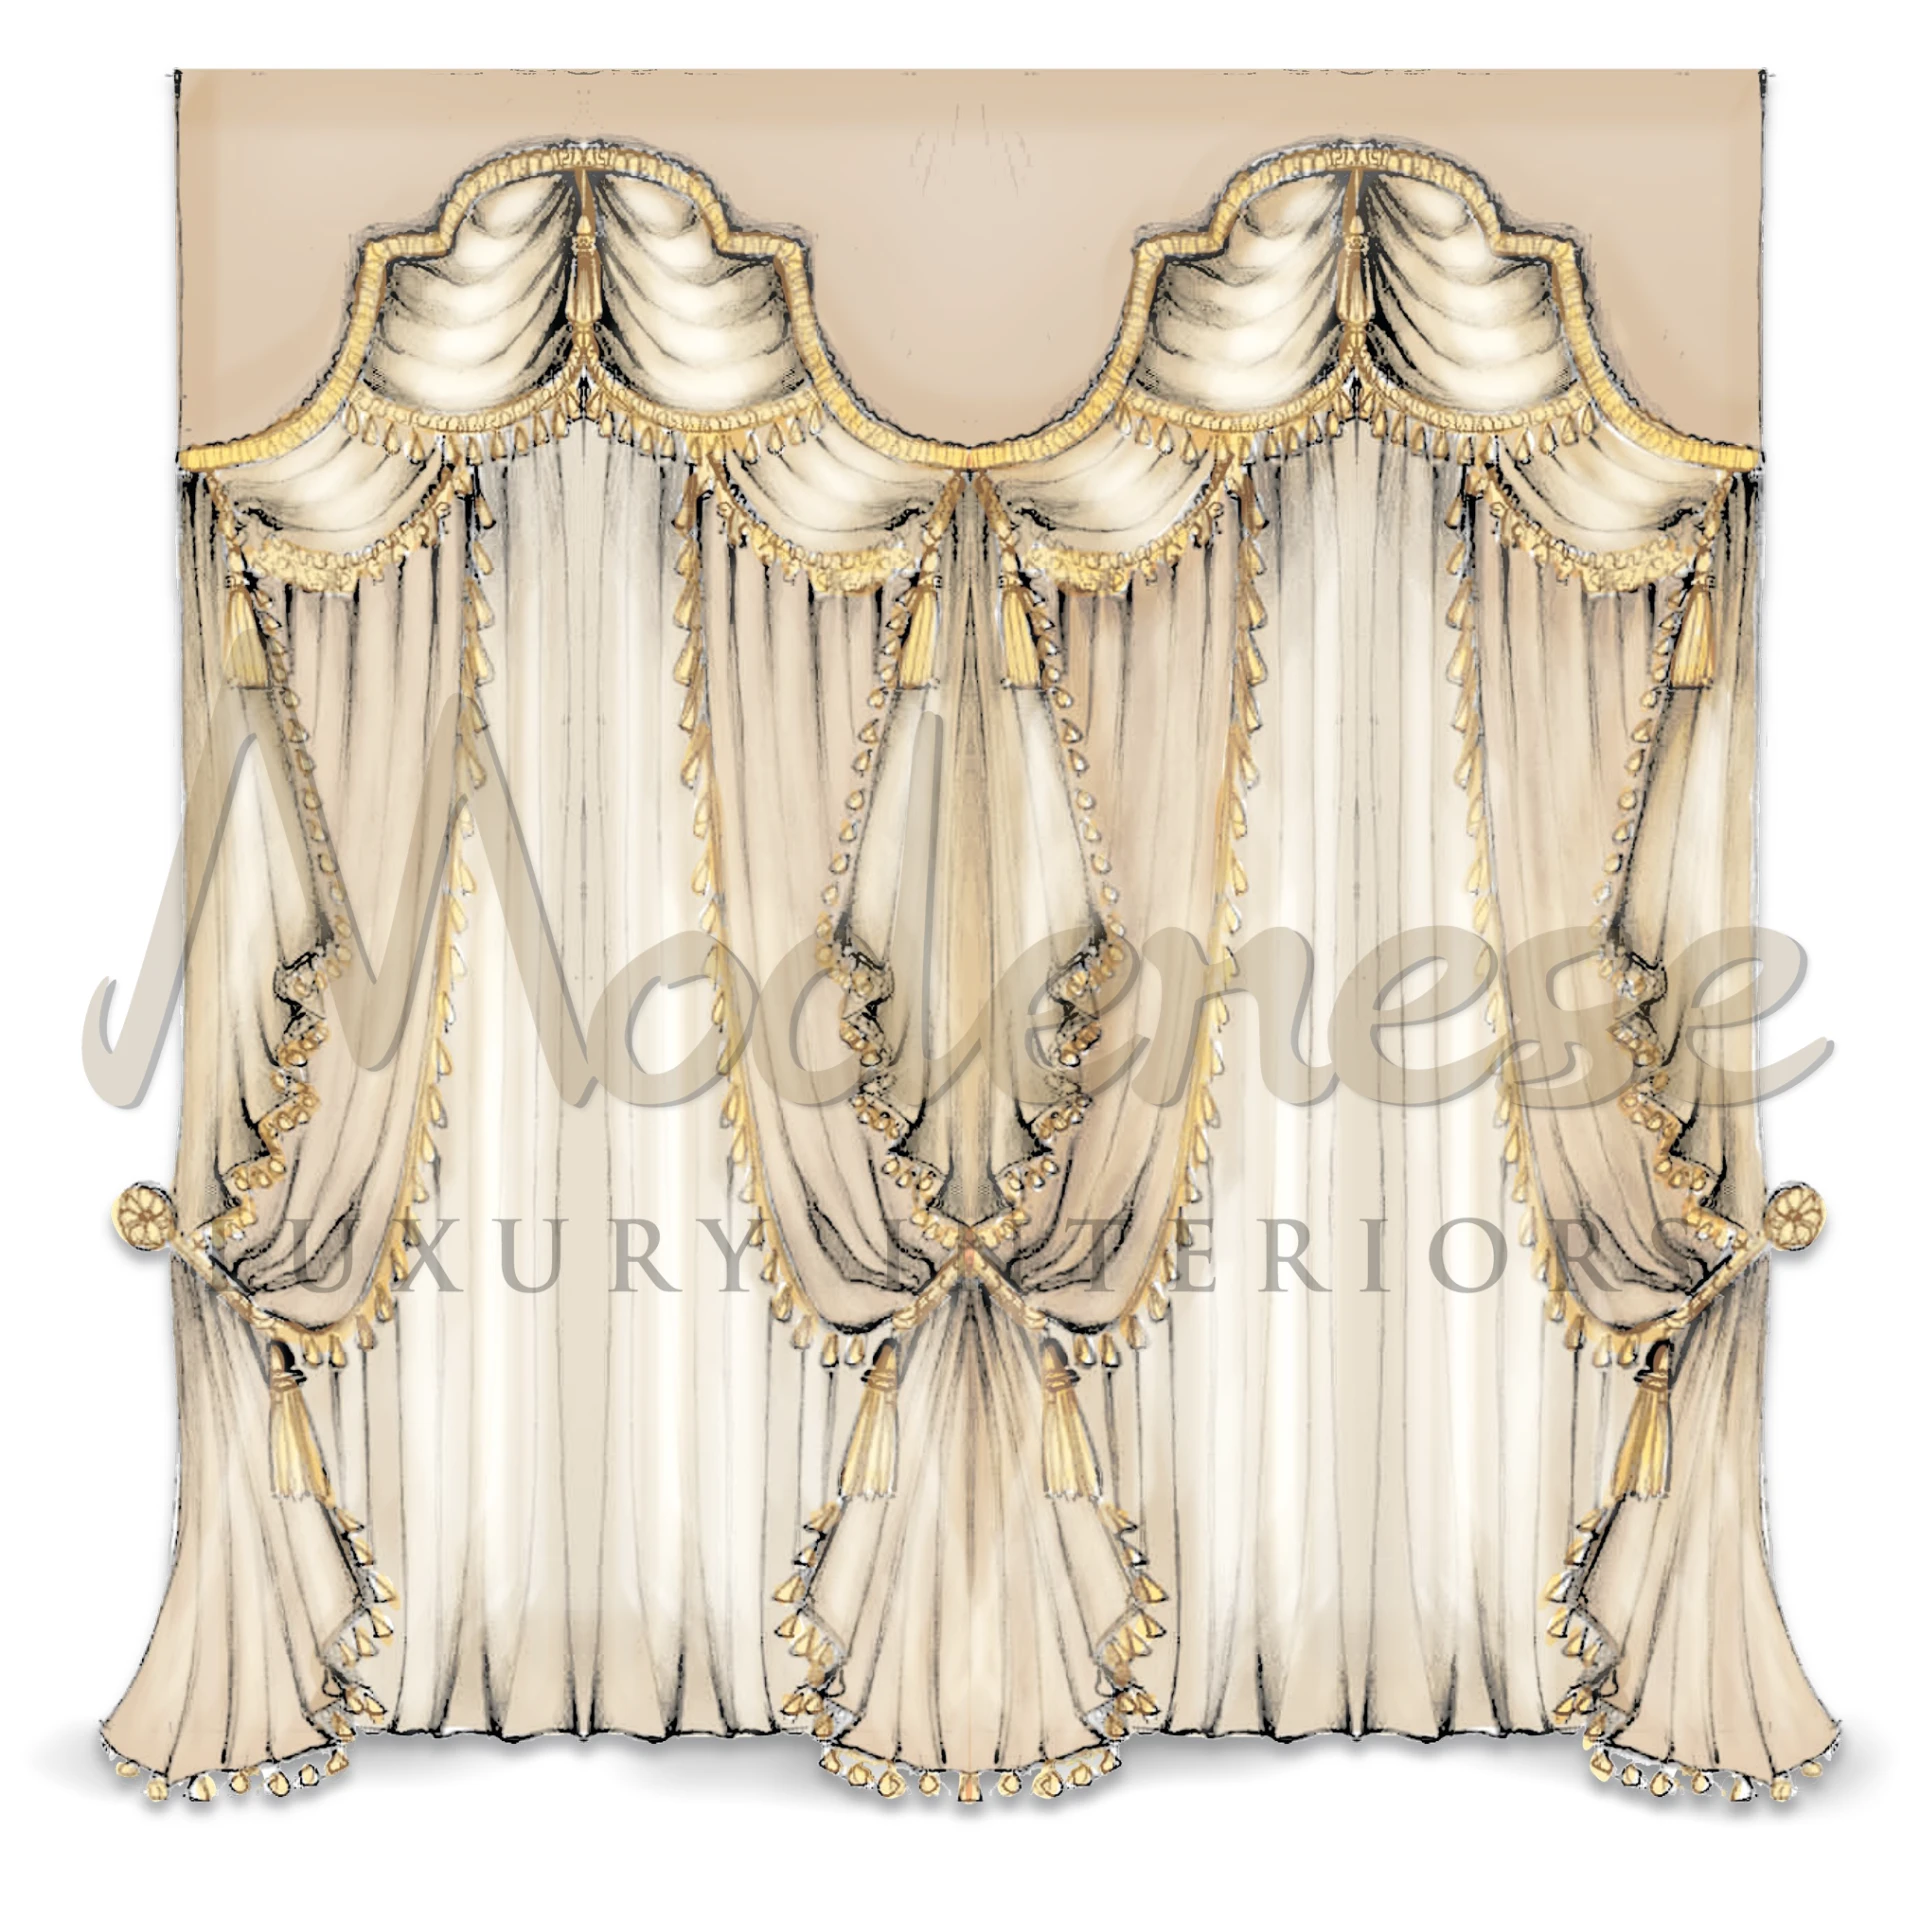 Victorian Beige Curtains, enhancing the room with their classic elegance, paired with ornate Victorian furniture for a cohesive look.